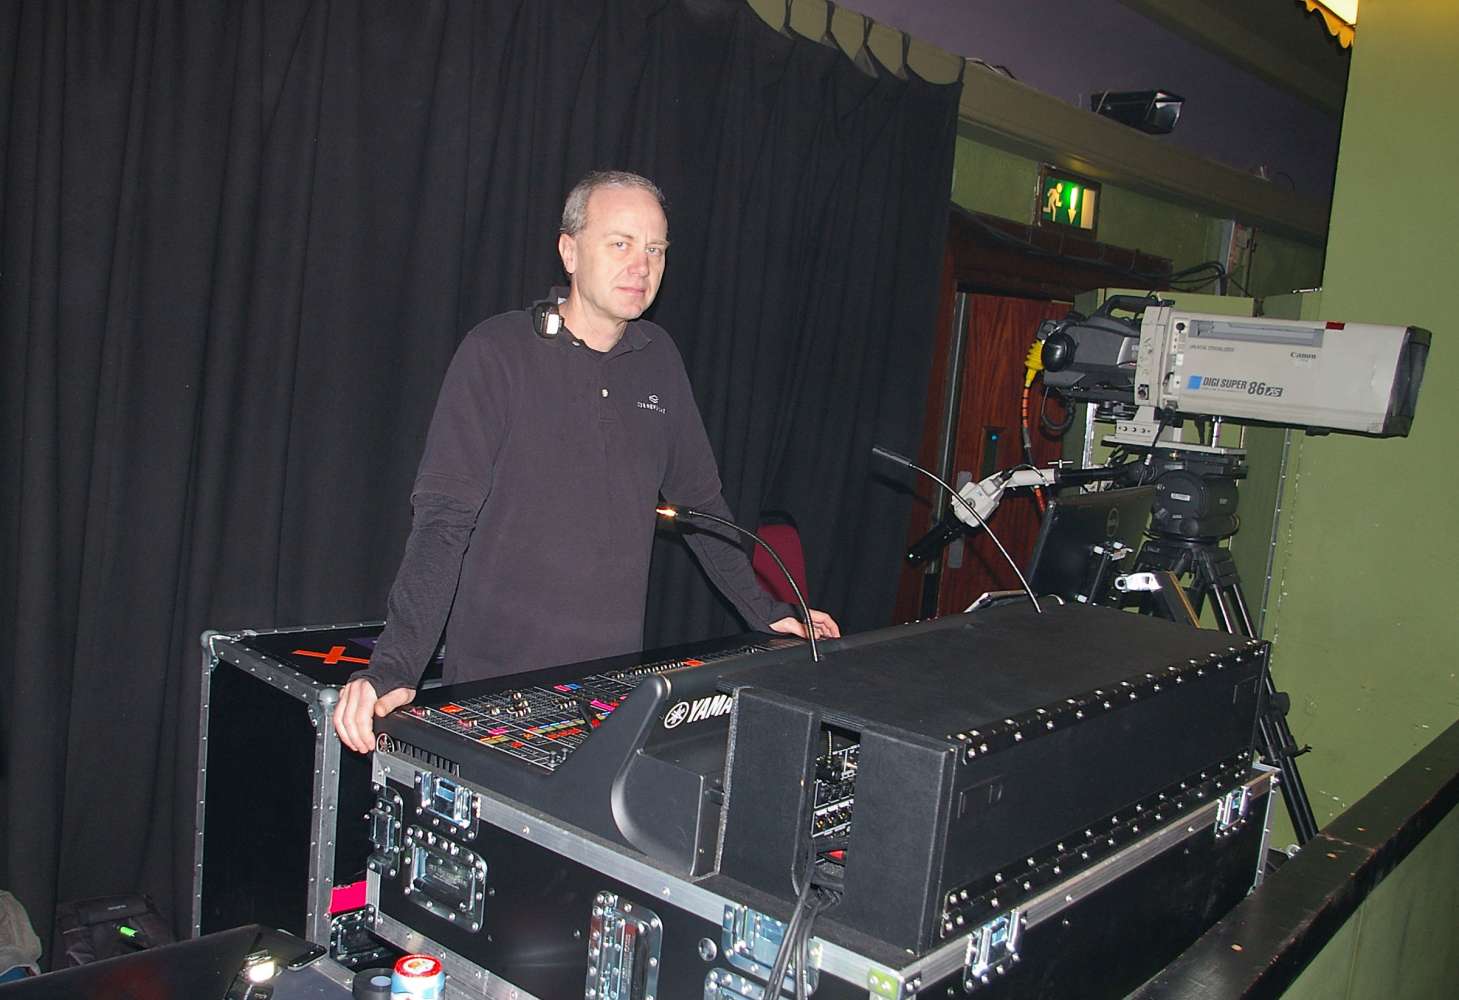 Donny Osmond’s tour manager and FOH engineer Chris Acton